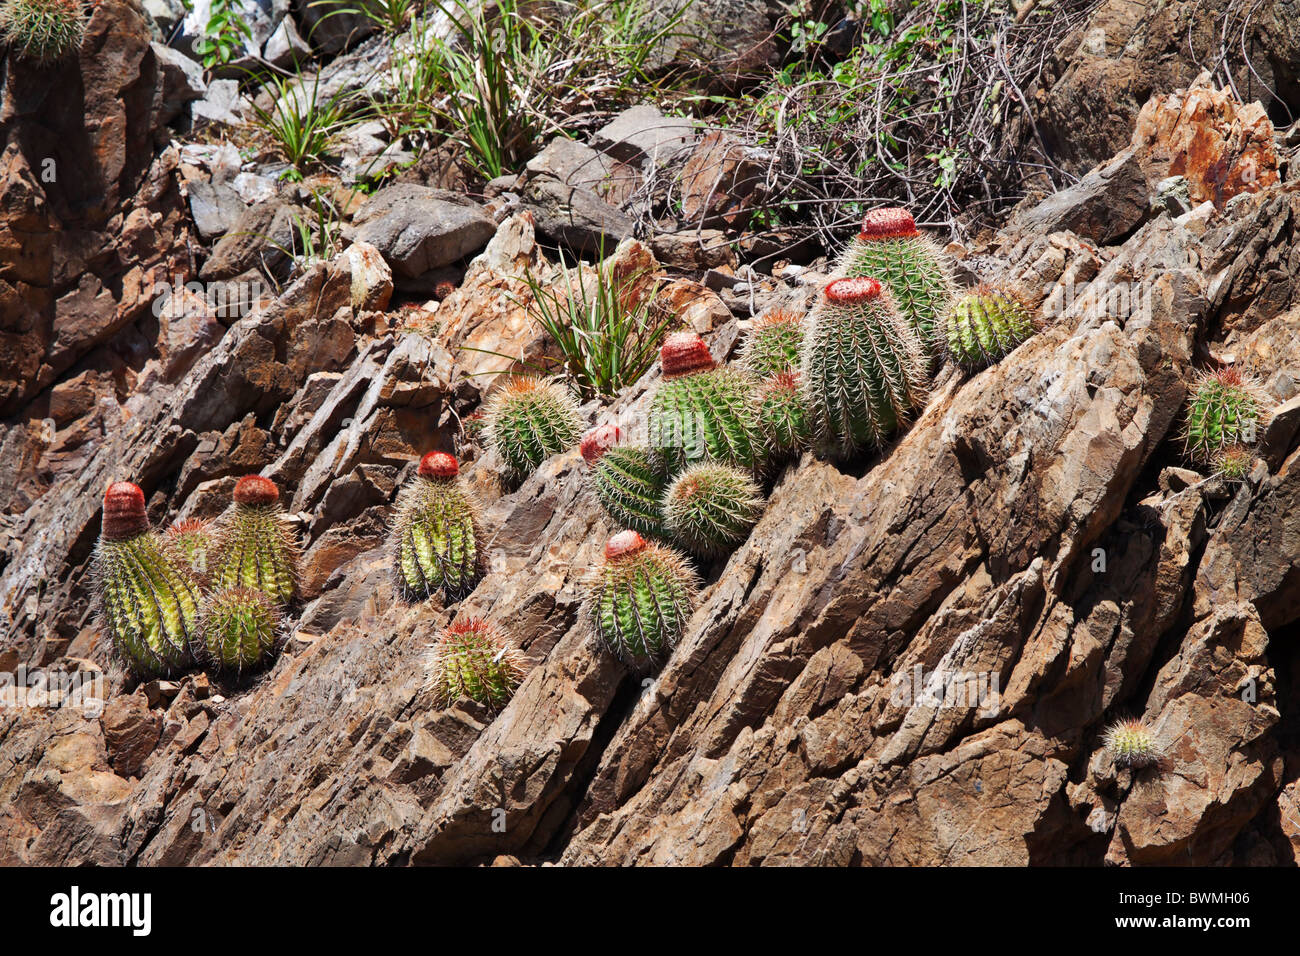 Turks Cap Cactus, Melocactus intortus, growing on a rocky hillside in the Caribbean Stock Photo